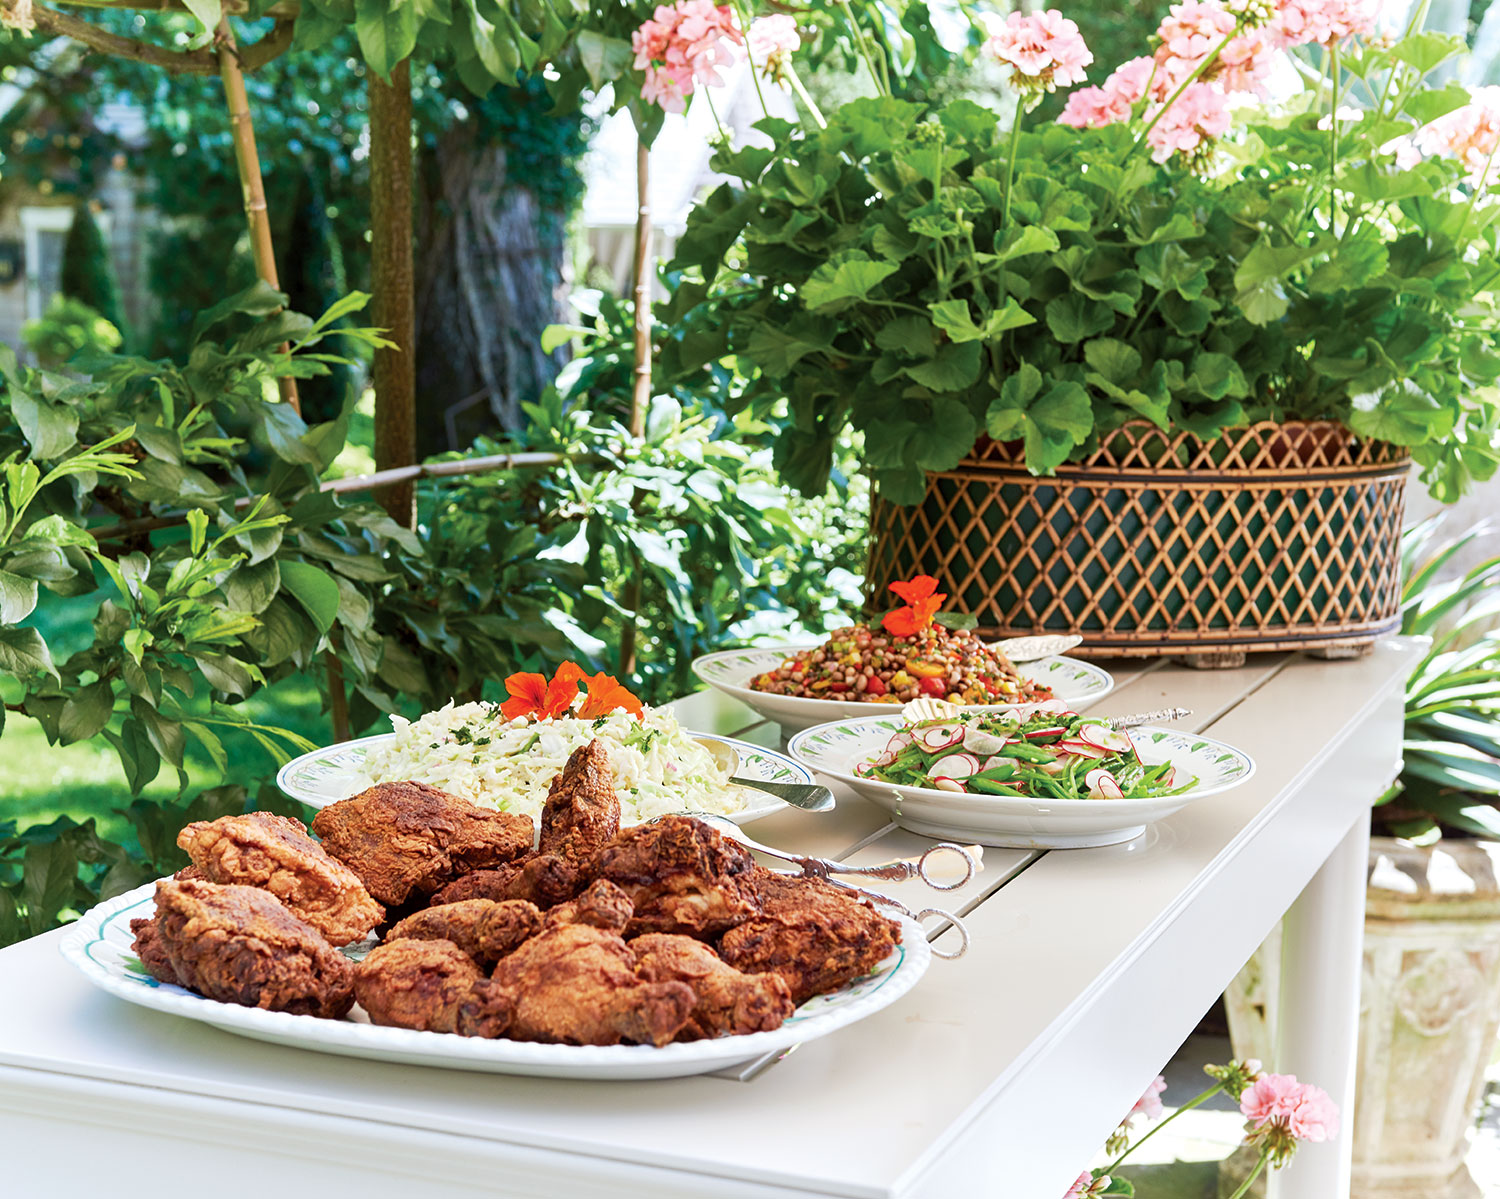 A buffet of fried chicken and other classic southern dishes awaits guests.